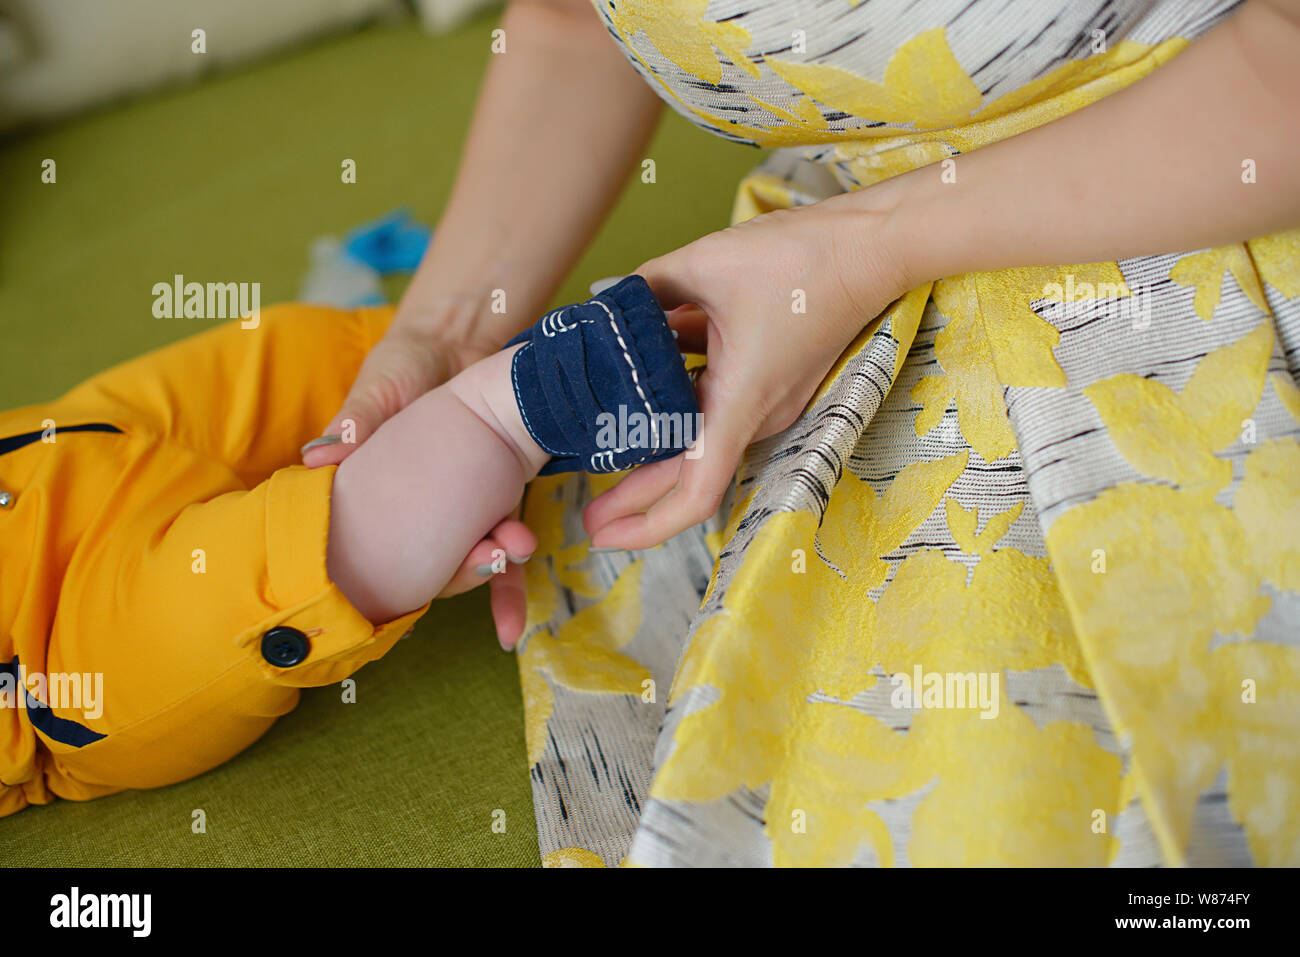 Caucasian young mother wearing a vintage yellow dress and helping little baby boy getting ready, with focus on the hands fitting cute blue booties Stock Photo